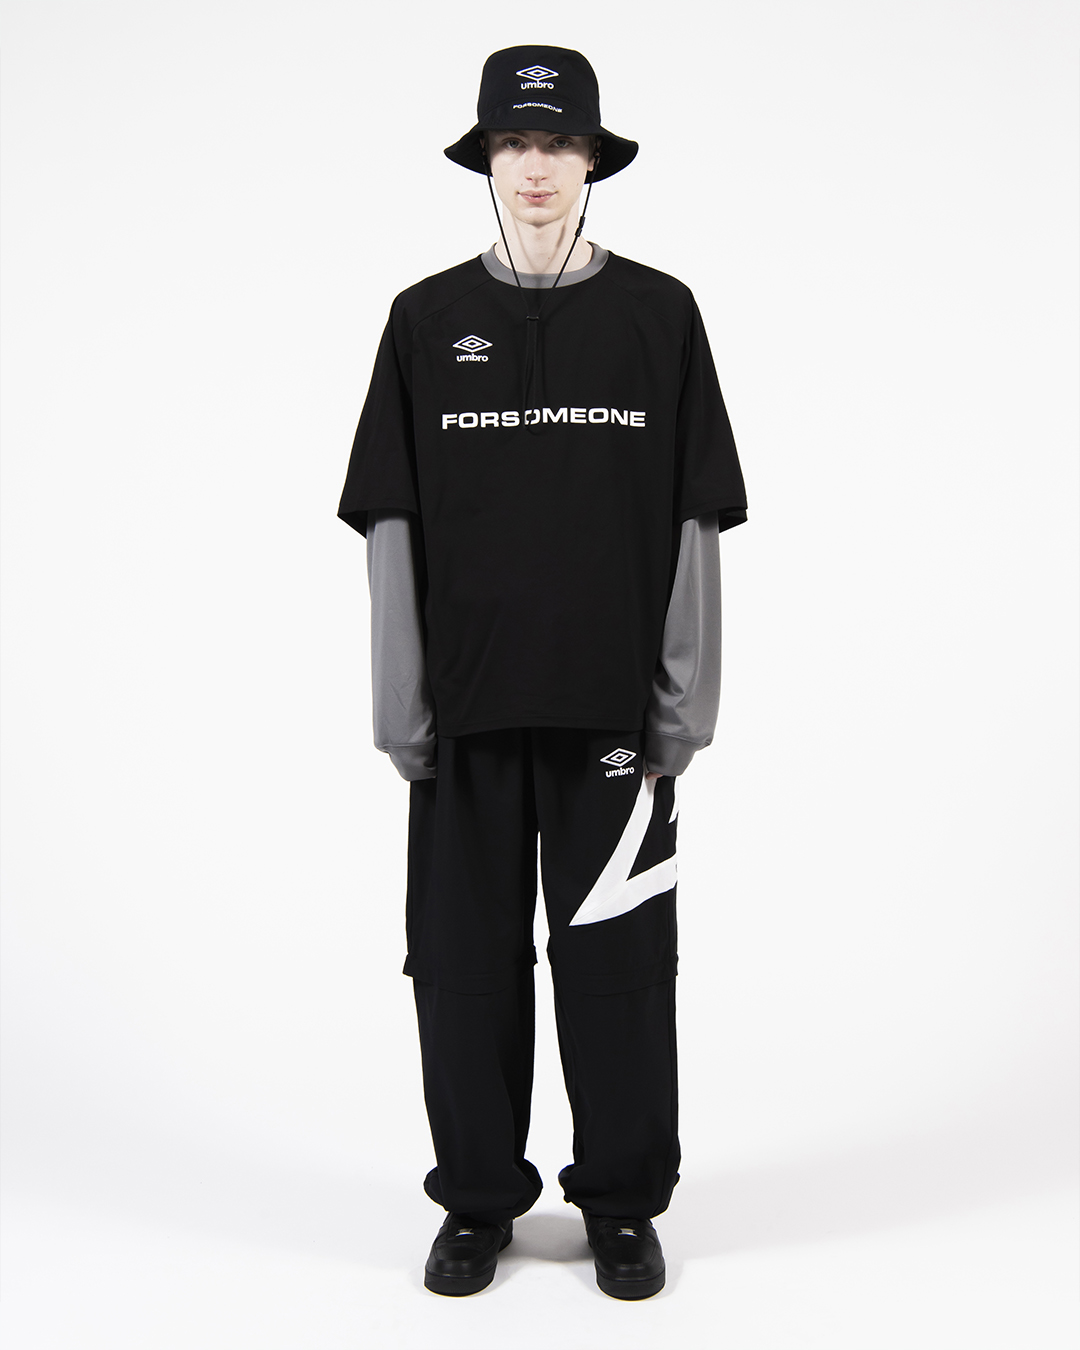 UMBRO OVERSIZED LAYERED LS TEE | FORSOMEONE(フォーサムワン)公式 